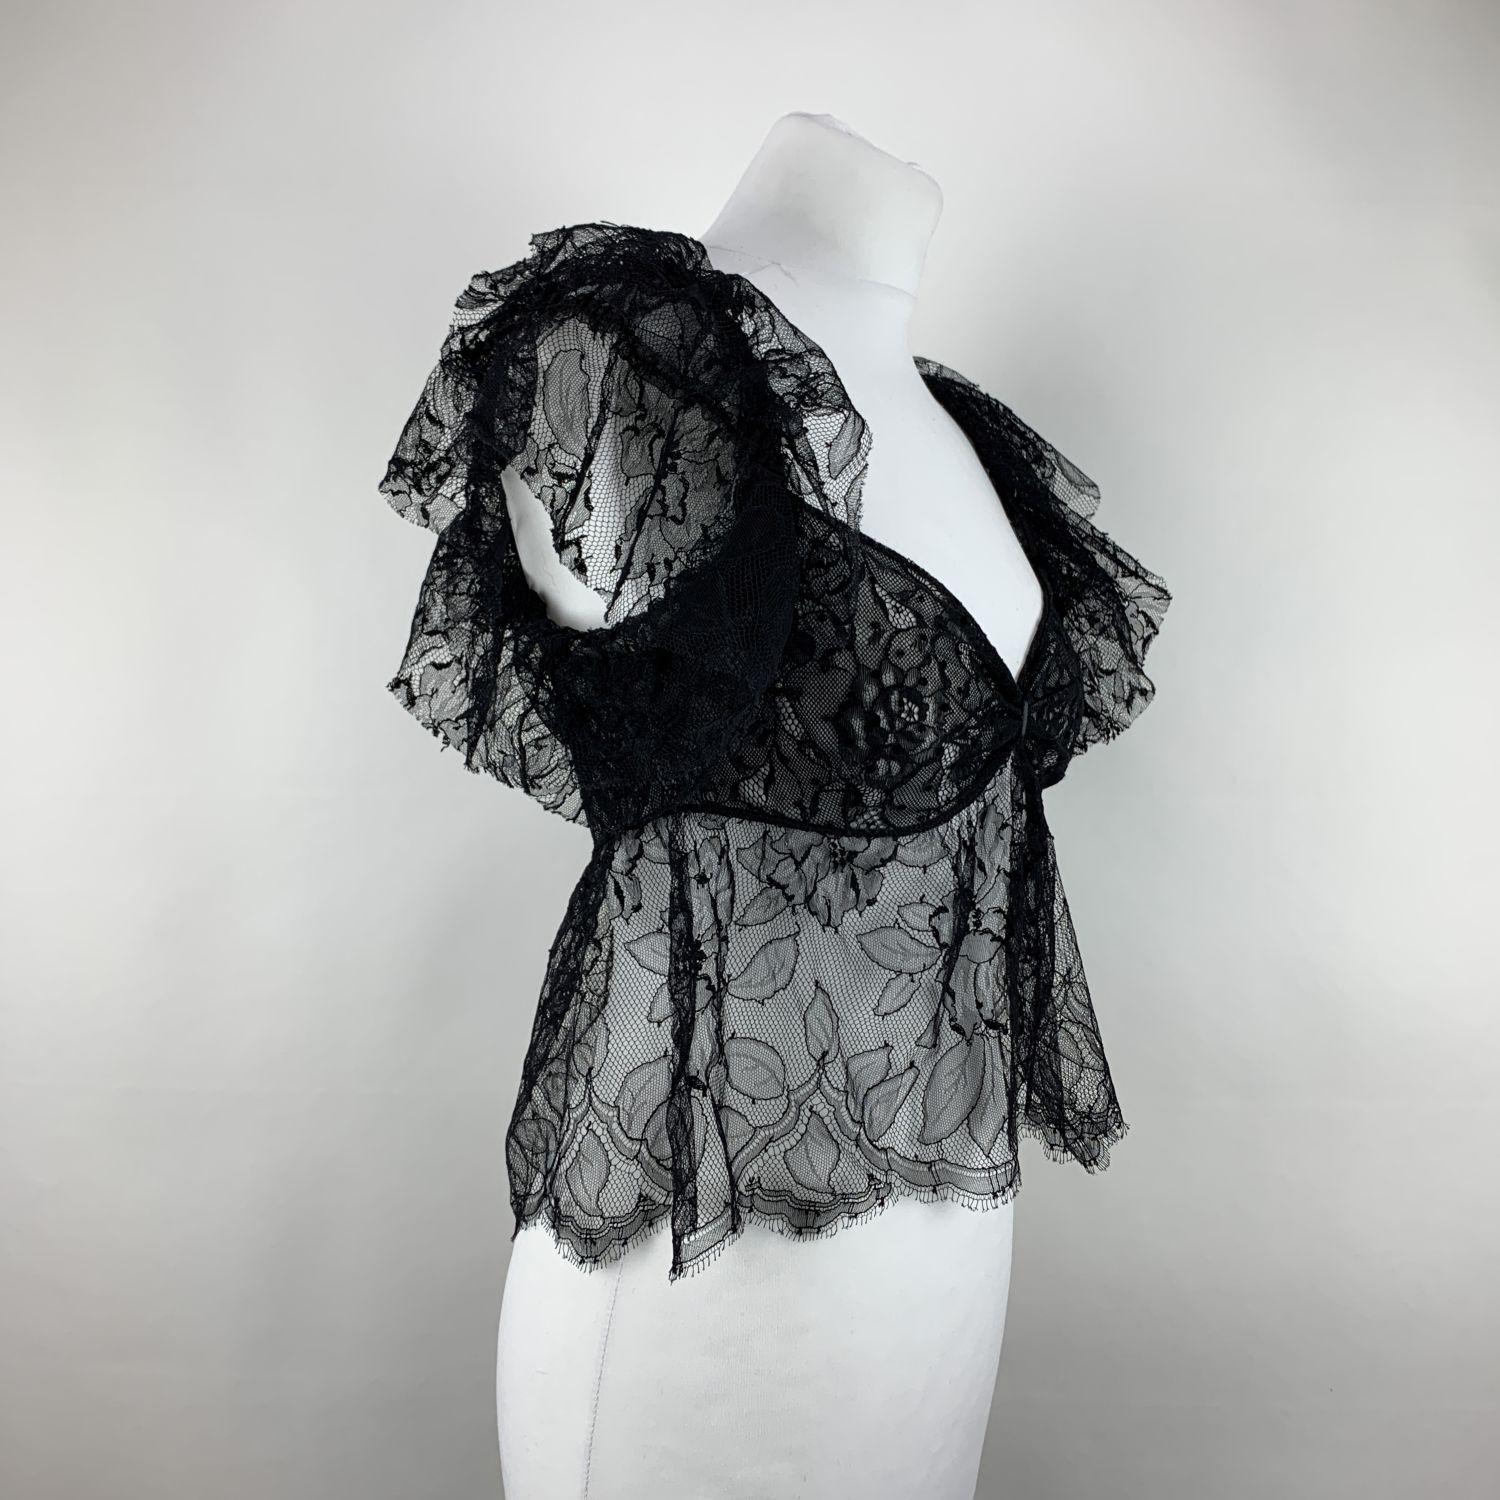 Yves Saint Laurent Black Lace Sheer Top. Frills detailing . Cropped length. Fabric / Material: 1st fabric:60% Viscose - 40% Nylon / 2nd fabric:80% Nylon - 20% Elastan. Color / Effect:Black Size: M (The size shown for this item is the size indicated